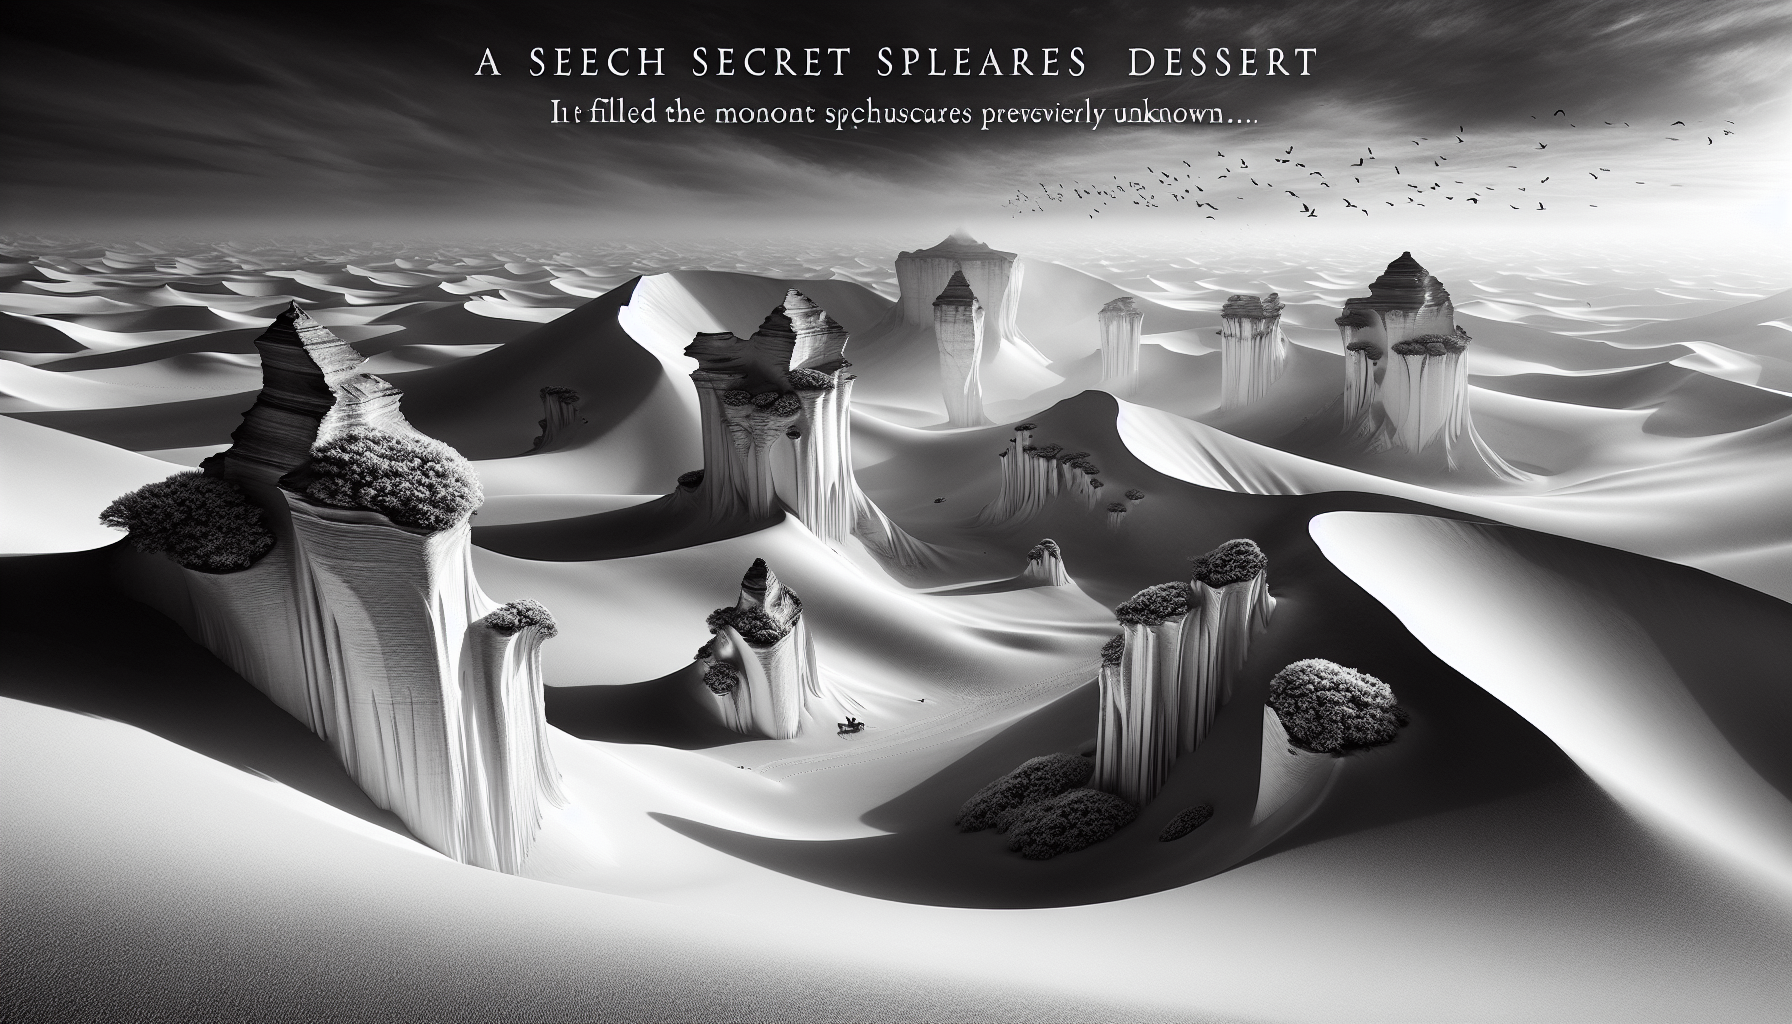 discover the hidden beauty of the white desert and uncover 5 astonishing wonders you never knew existed. embark on a journey of wonder and amazement as you explore these hidden marvels.